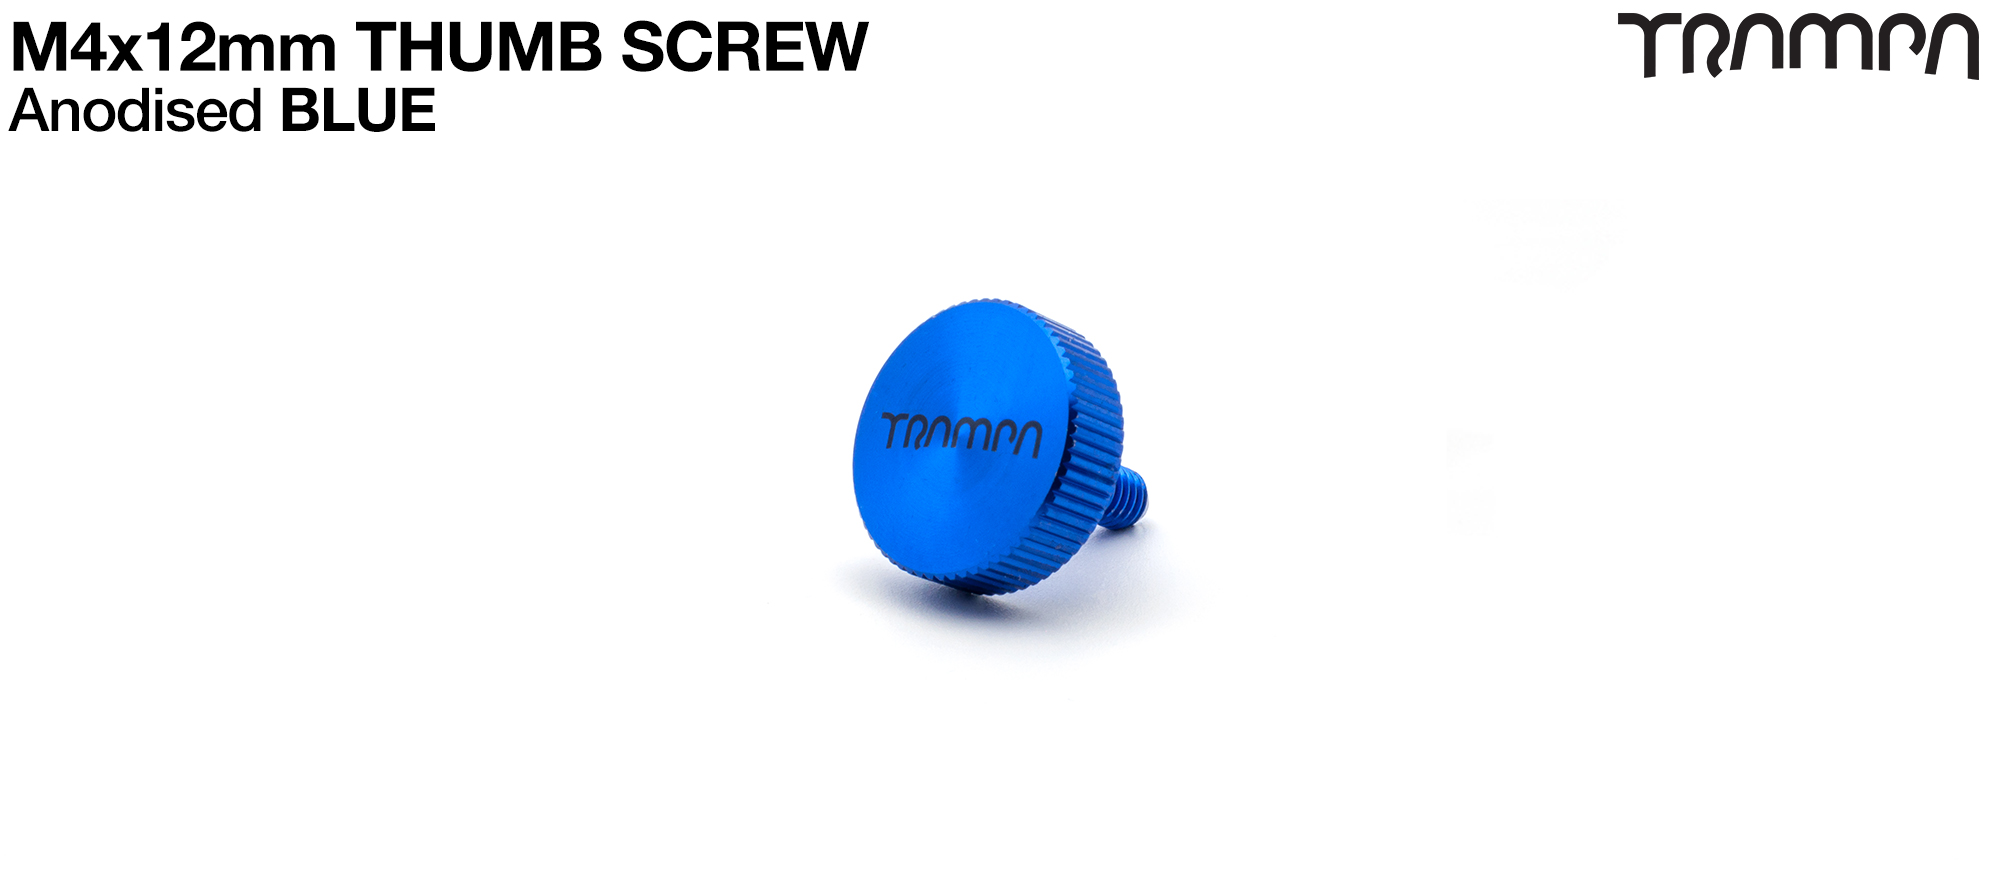 Inspection pit thumb Screw - BLUE 